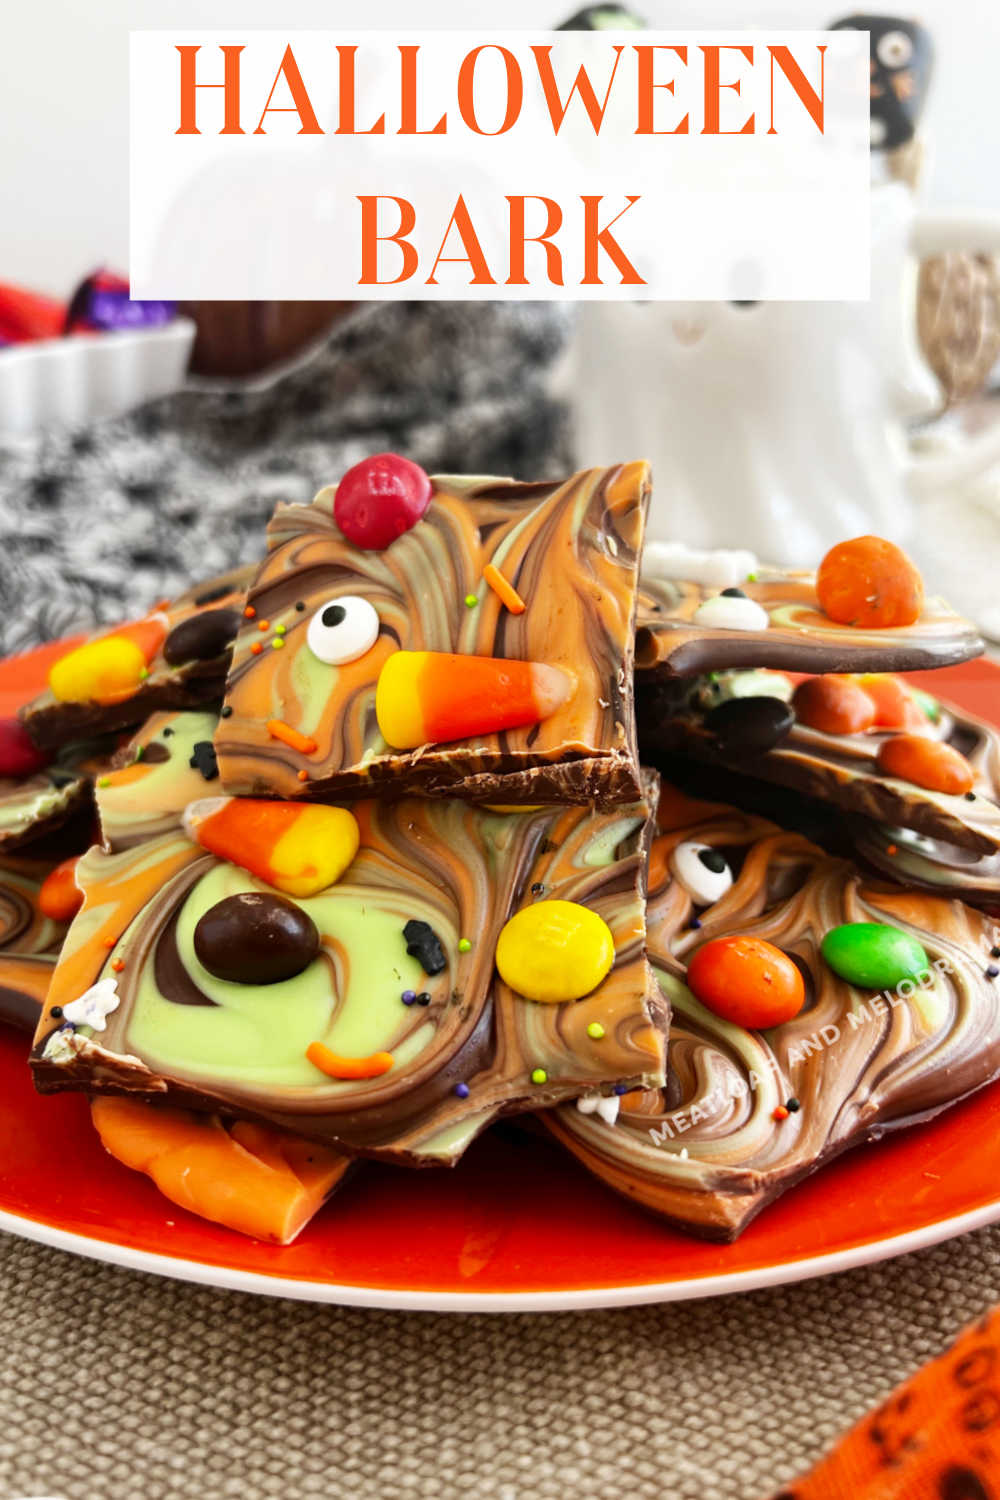 Easy Halloween Candy Bark is an easy Halloween dessert made with melted chocolate, candy melts, candy corn and your favorite candies. Perfect for a Halloween party! via @meamel